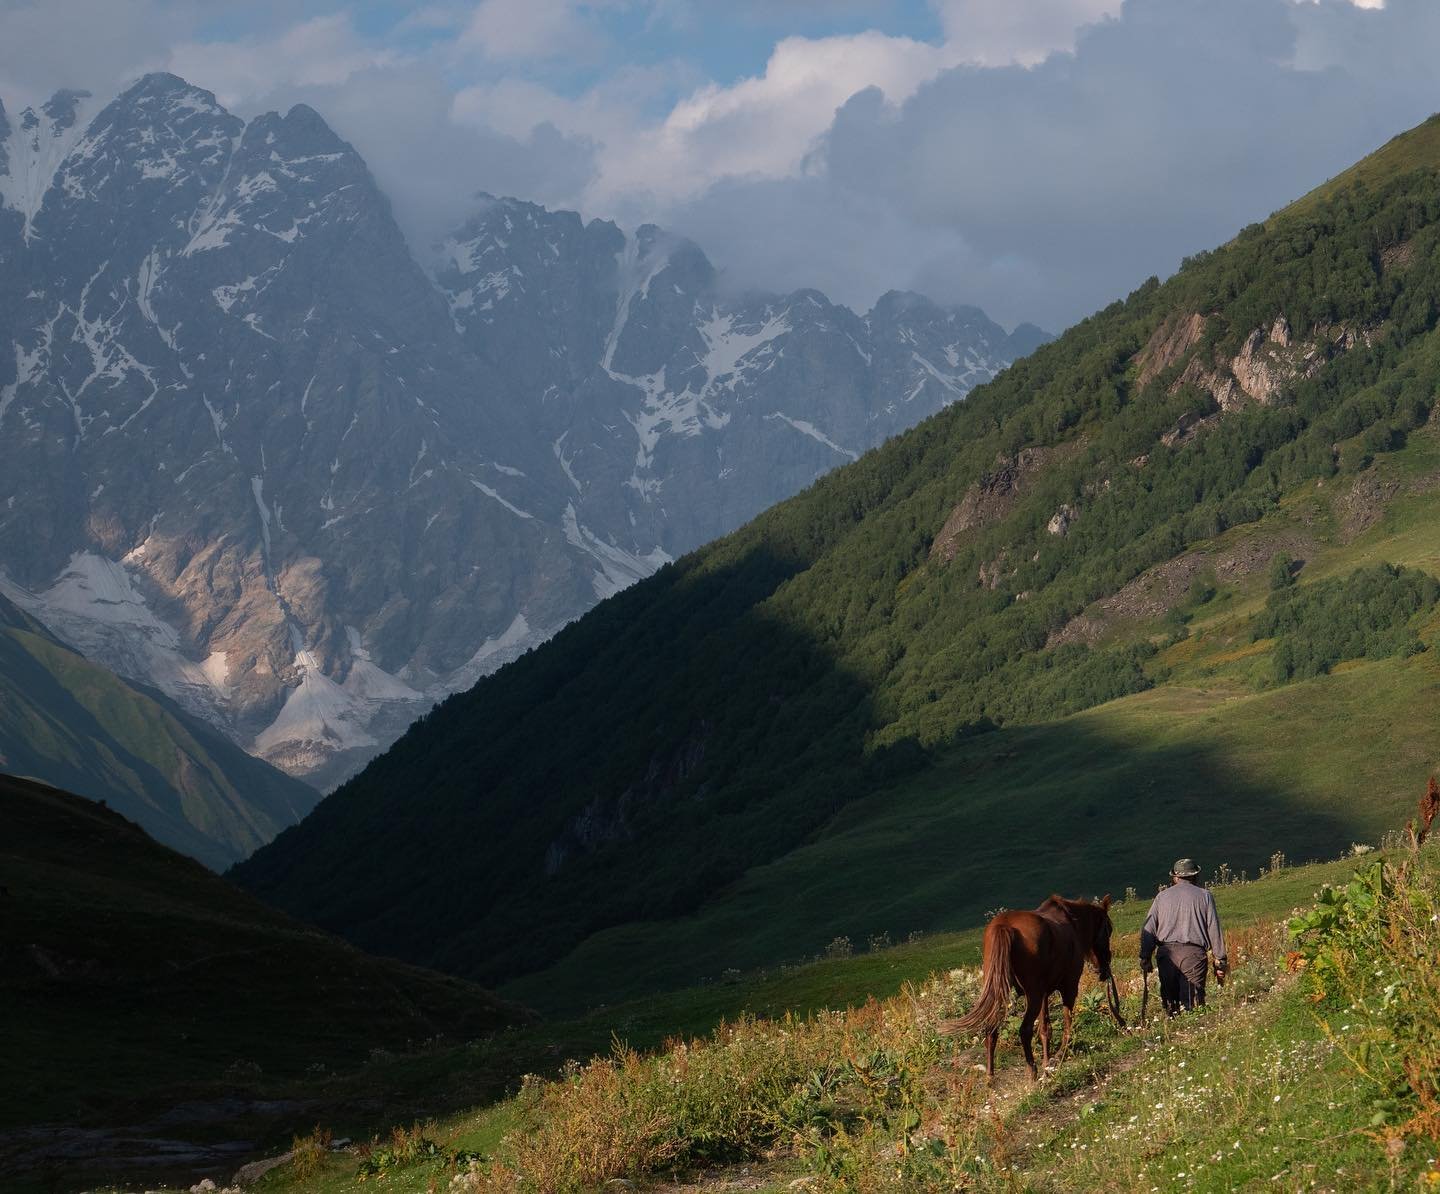 When the sun goes down, the shepherd leaves the village to look for the herd in the mountains. At night, cows and sheep are easy preys for bears and wolves. Svaneti region is famous for having large numbers of those predators.

Ushguli, Georgia
.
.
.